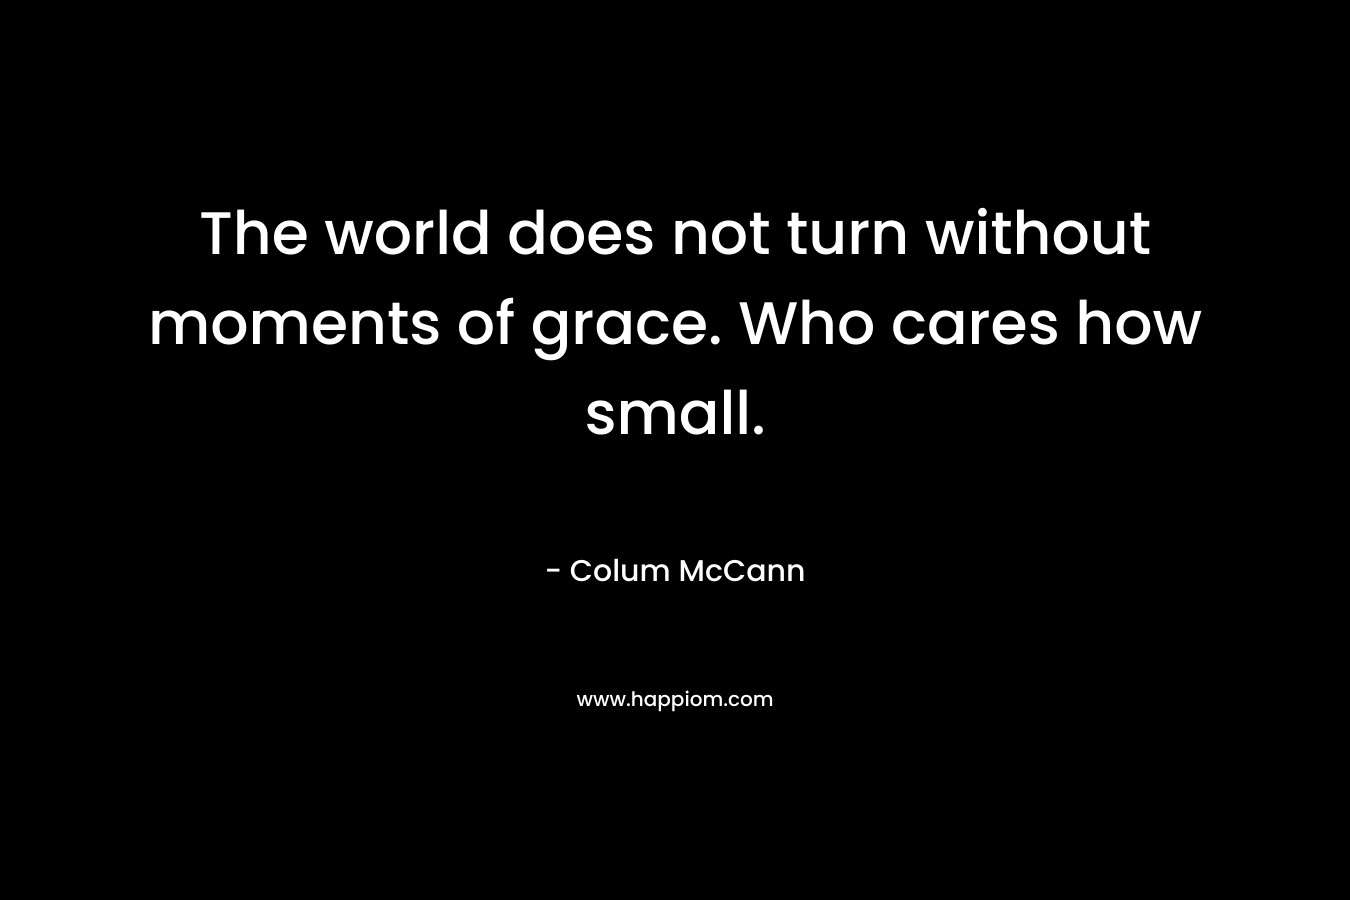 The world does not turn without moments of grace. Who cares how small. – Colum McCann